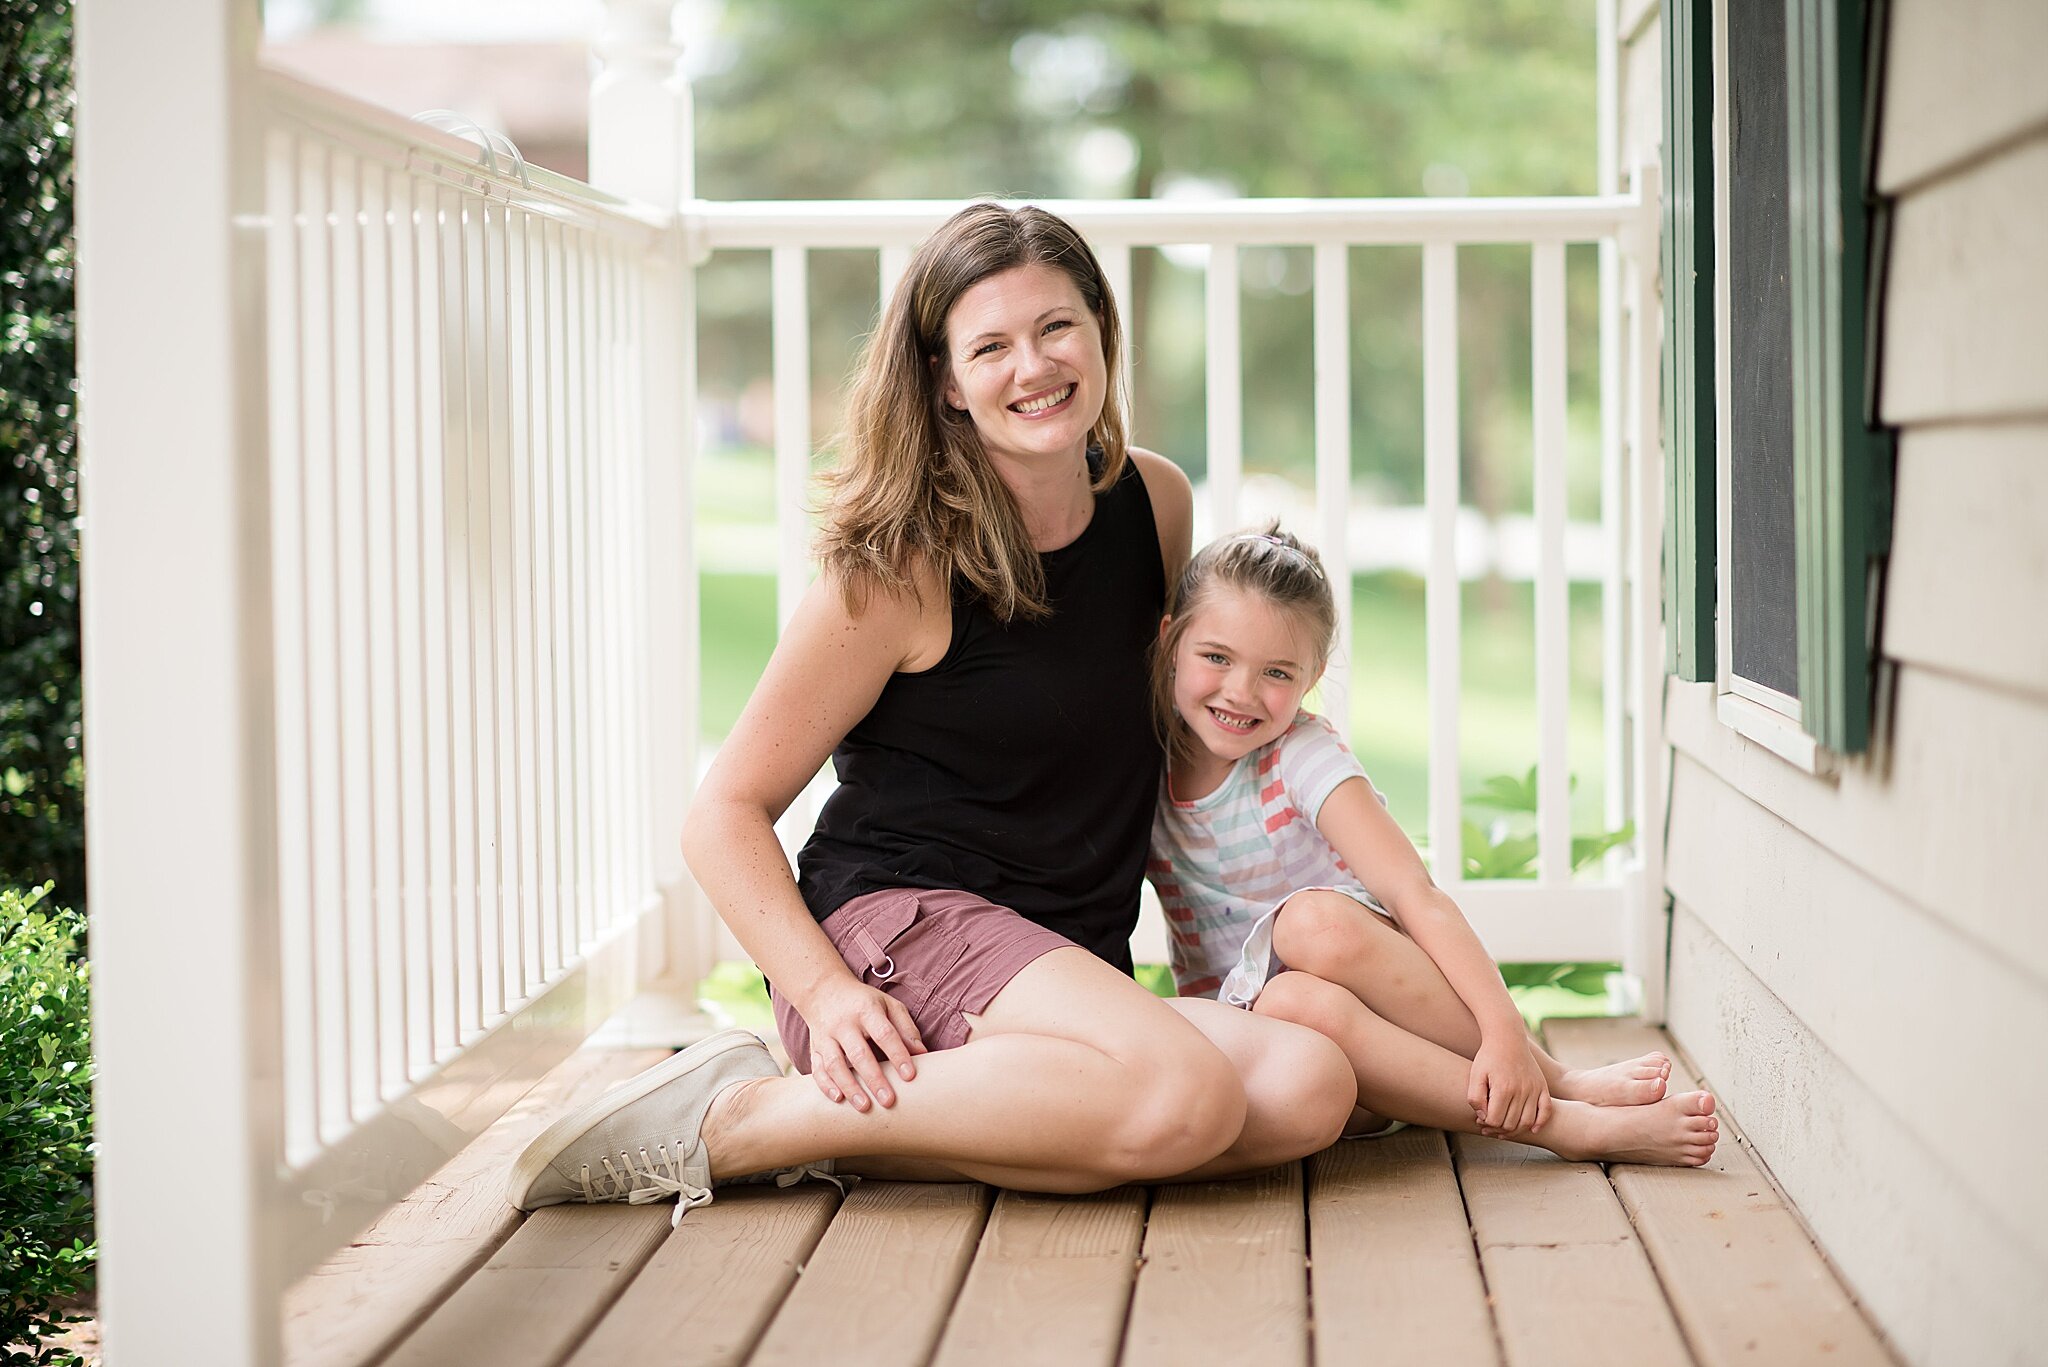 Wendy Zook Photography shares her journey with goiters and benign lumps on her thyroid, thyroid issues, medical concerns, motherhood, keep yourself healthy